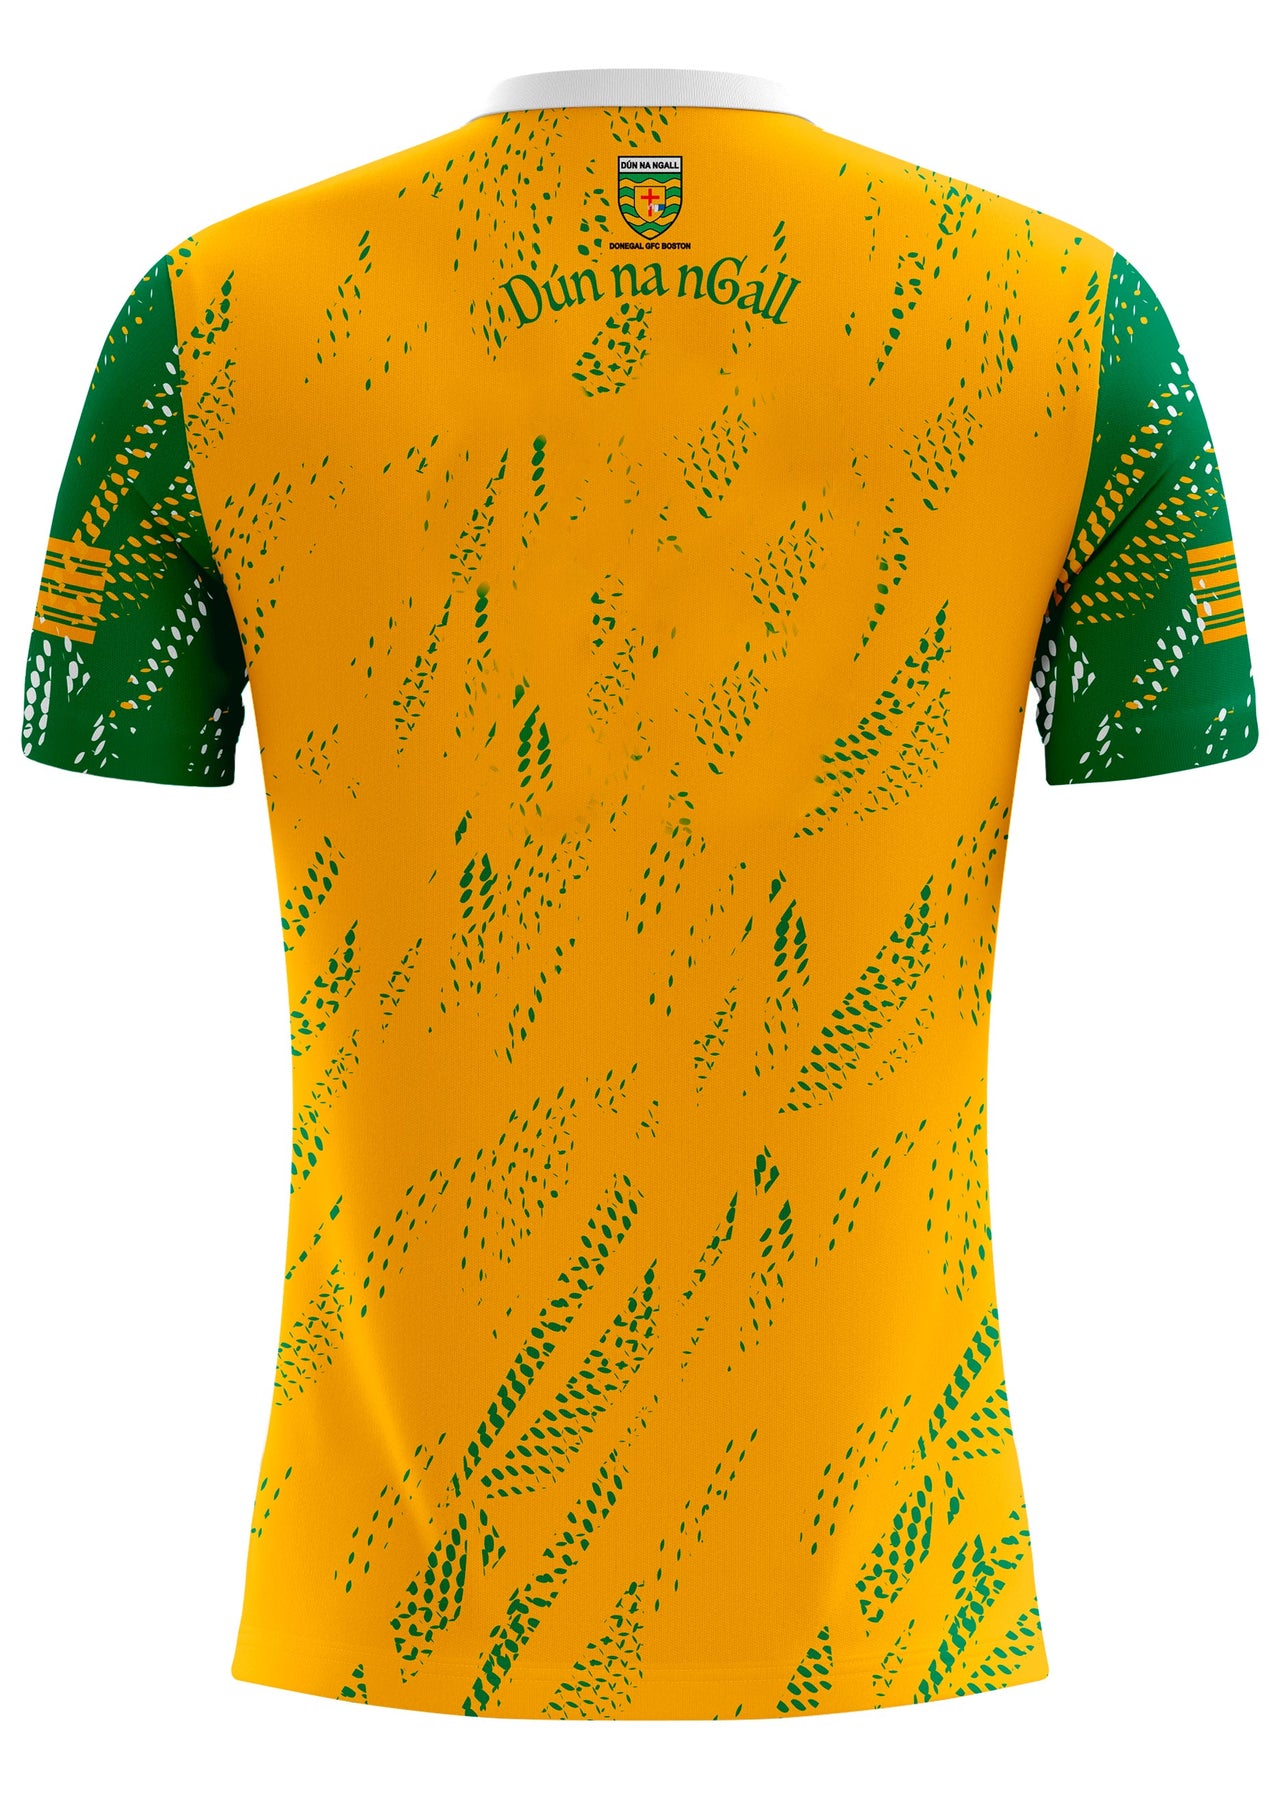 Donegal Boston Intermediate Team Jersey Player Fit Adult